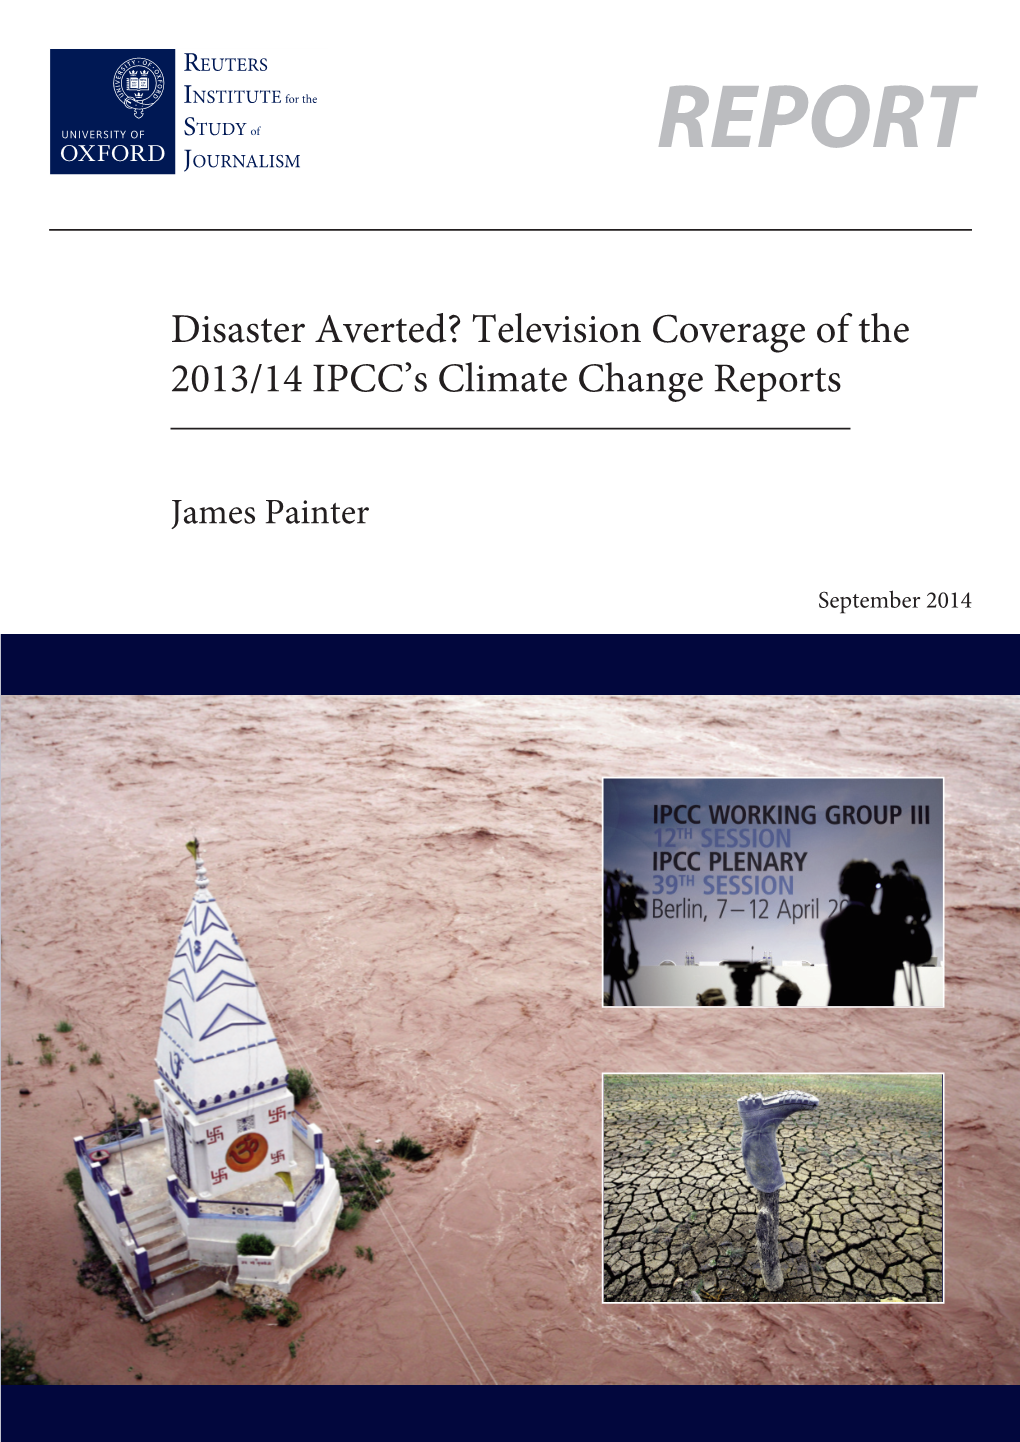 Television Coverage of the 2013/14 IPCC's Climate Change Reports